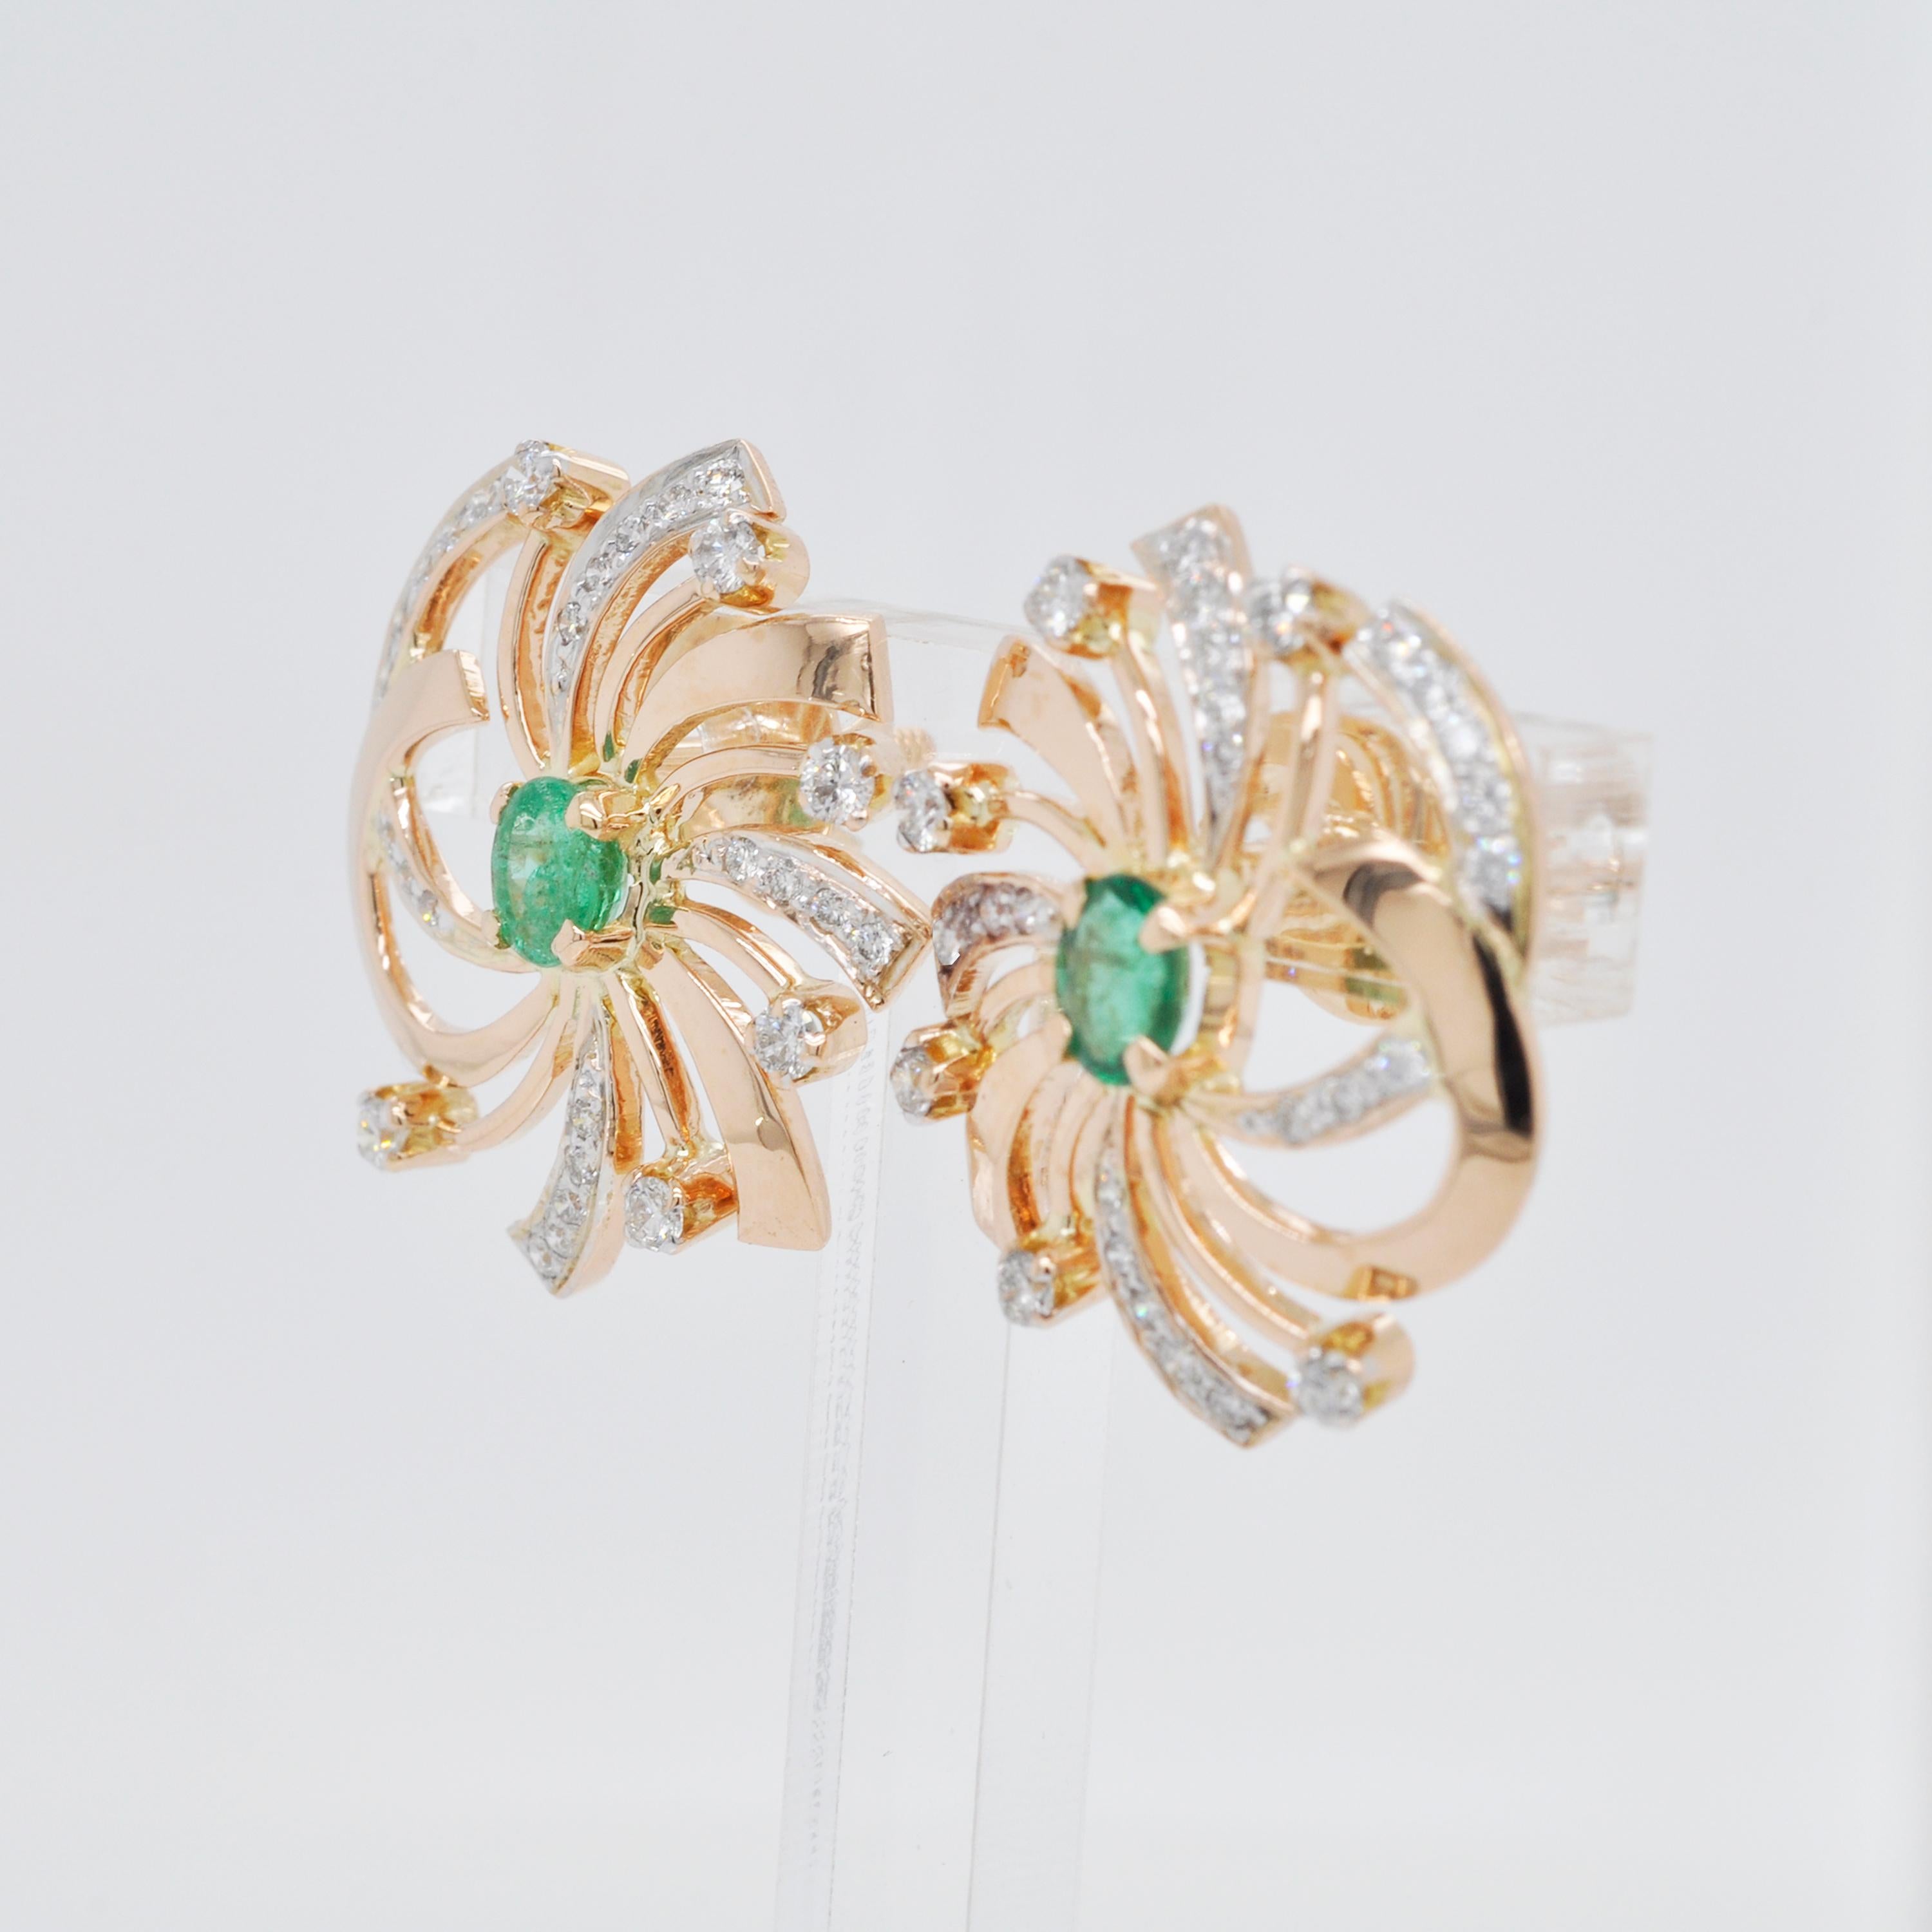 18 Karat Gold Natural Zambian Emerald Swirl Diamond Stud Earrings In New Condition For Sale In Jaipur, Rajasthan